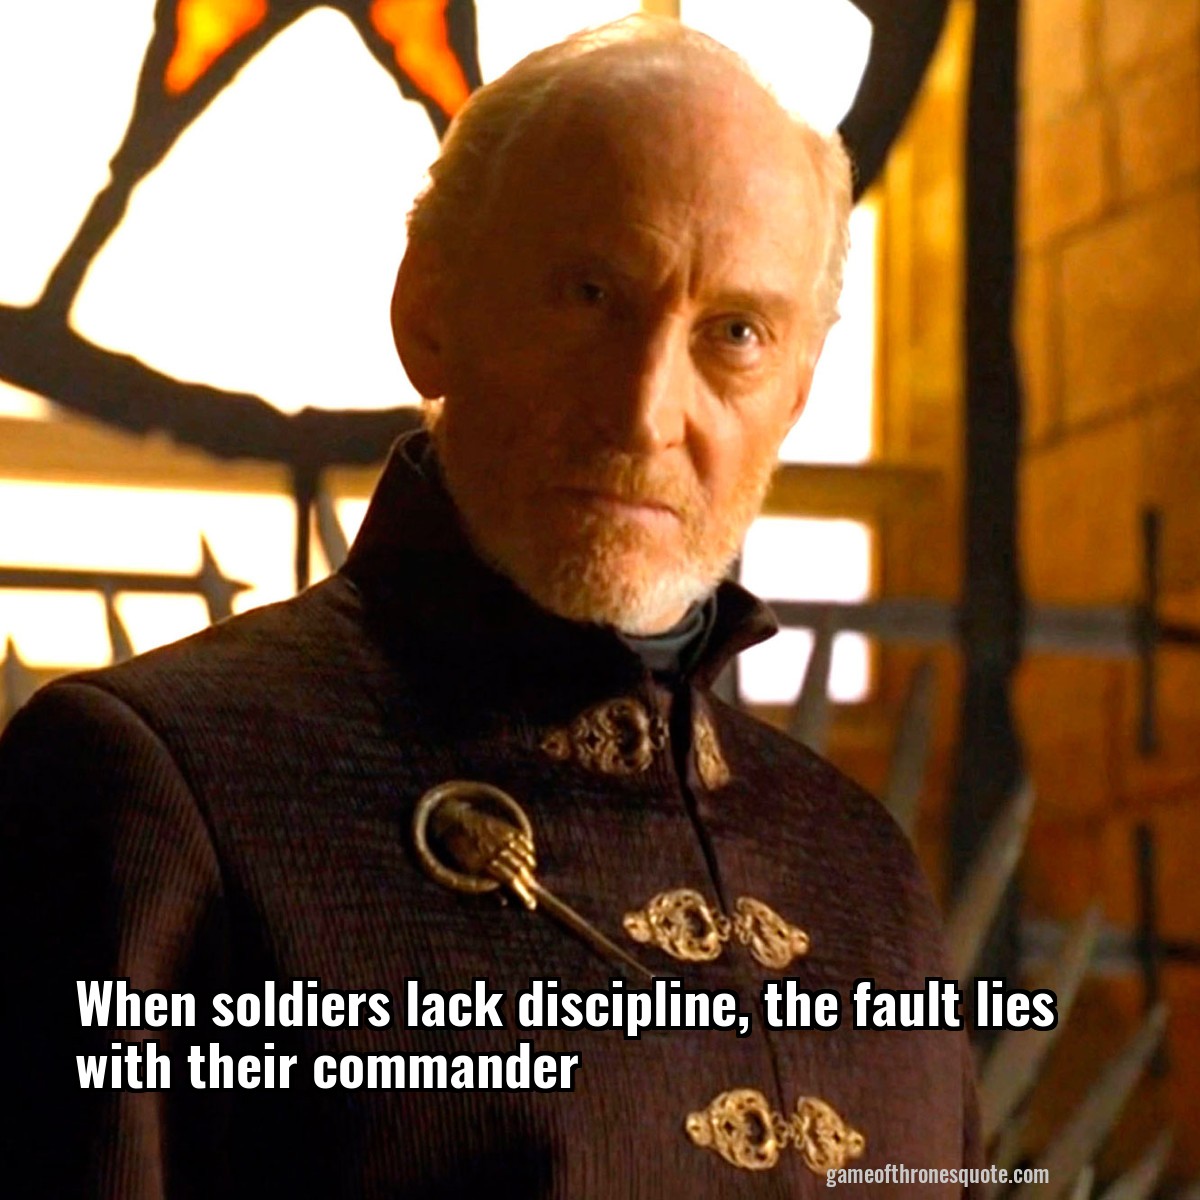 When soldiers lack discipline, the fault lies with their commander